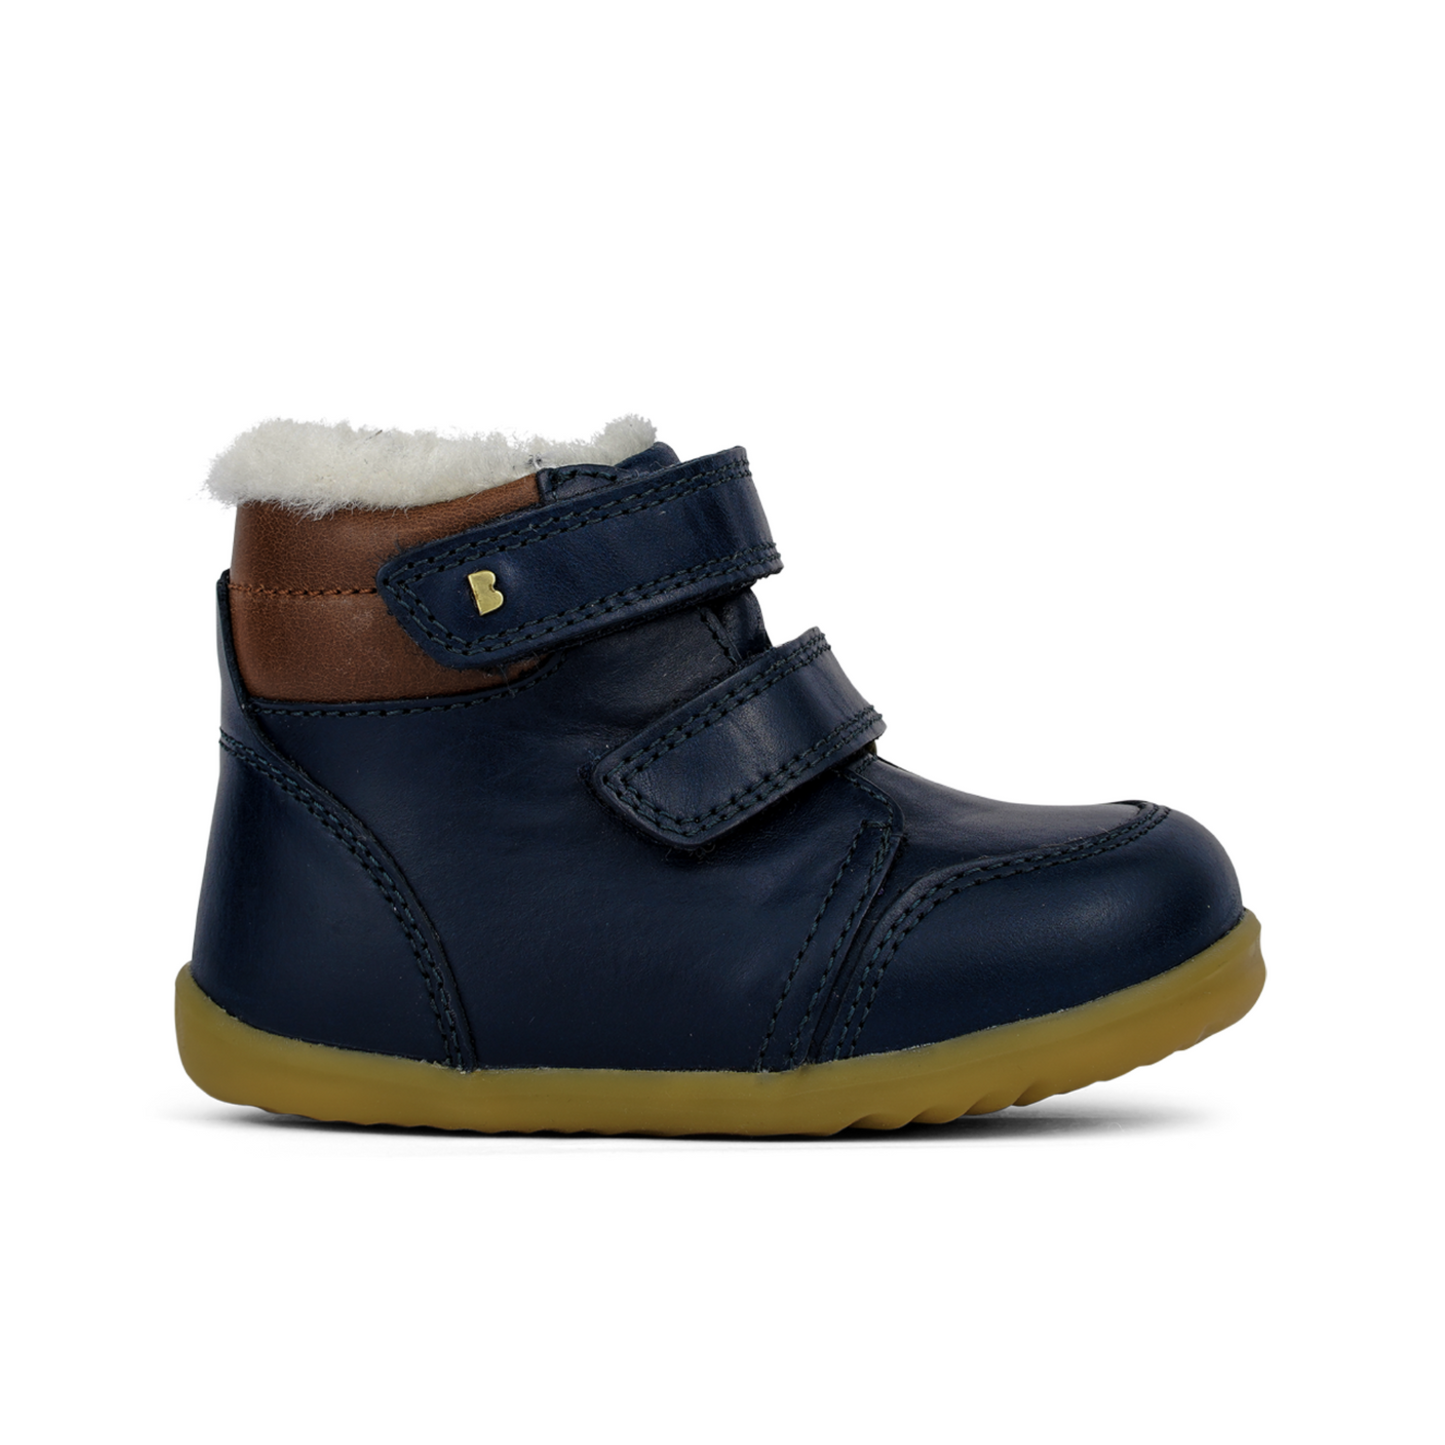 SU Timber Arctic Boot in Navy Leather